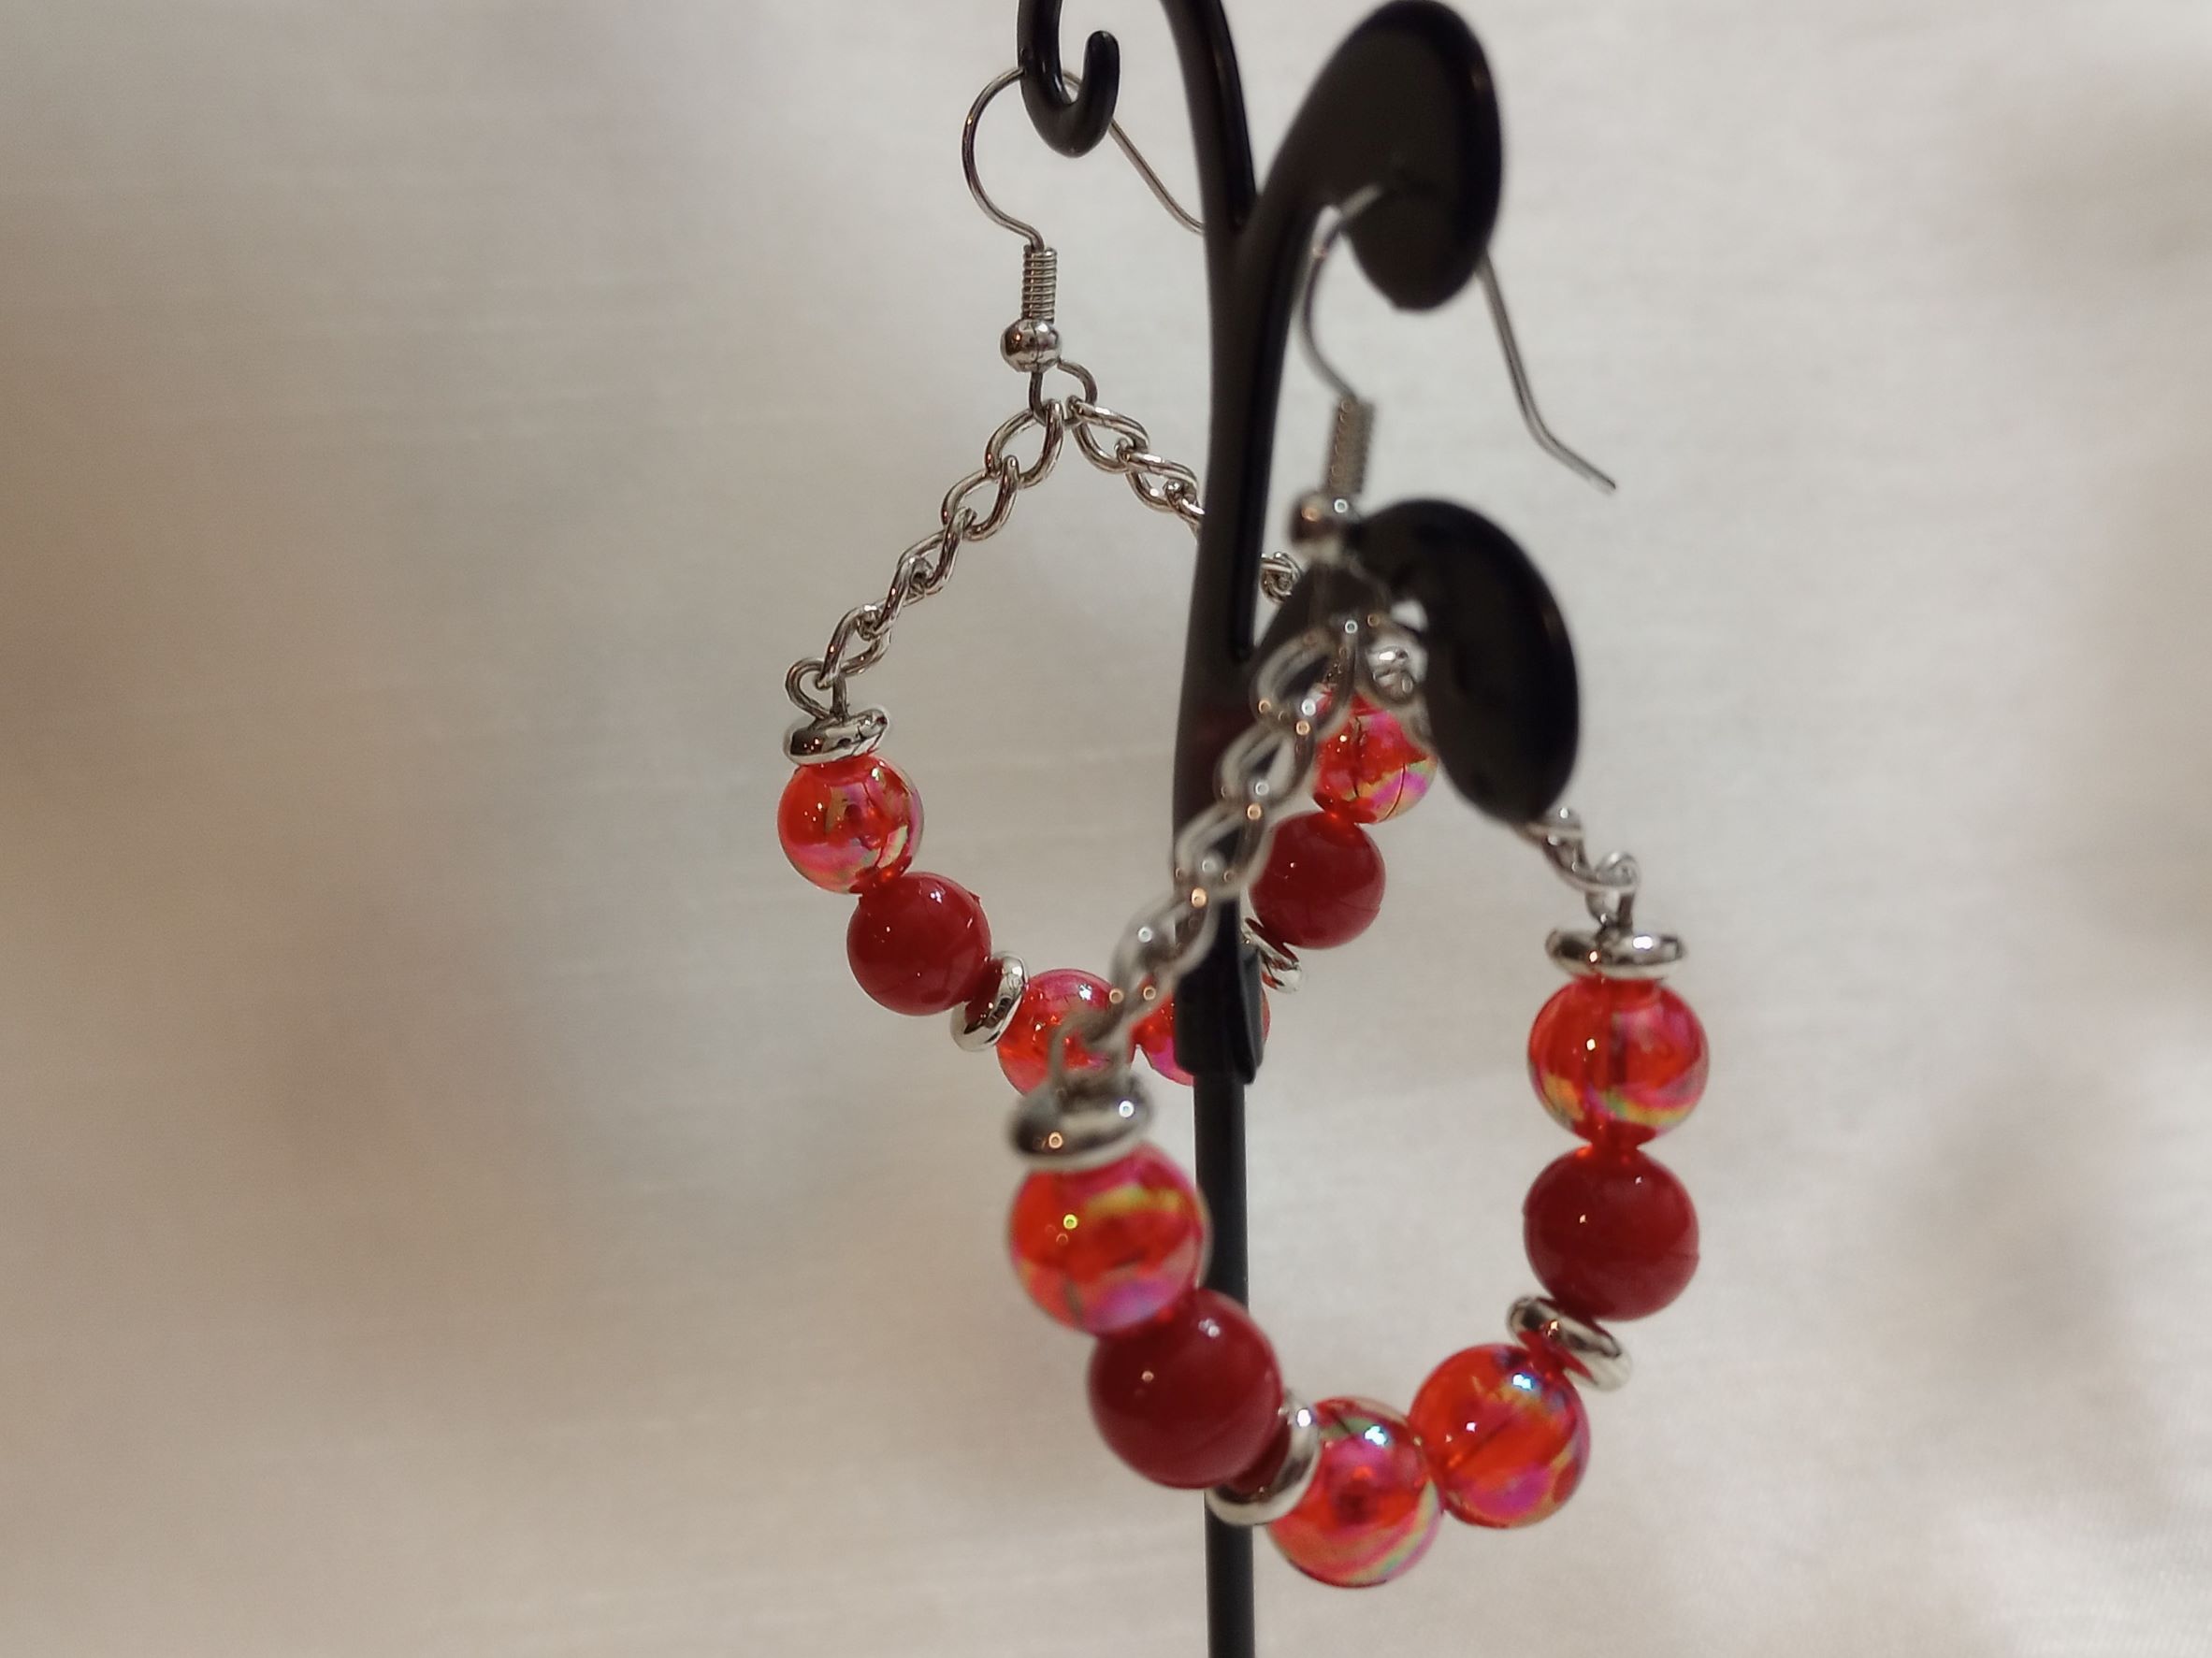 A – Red Sparkle Earrings